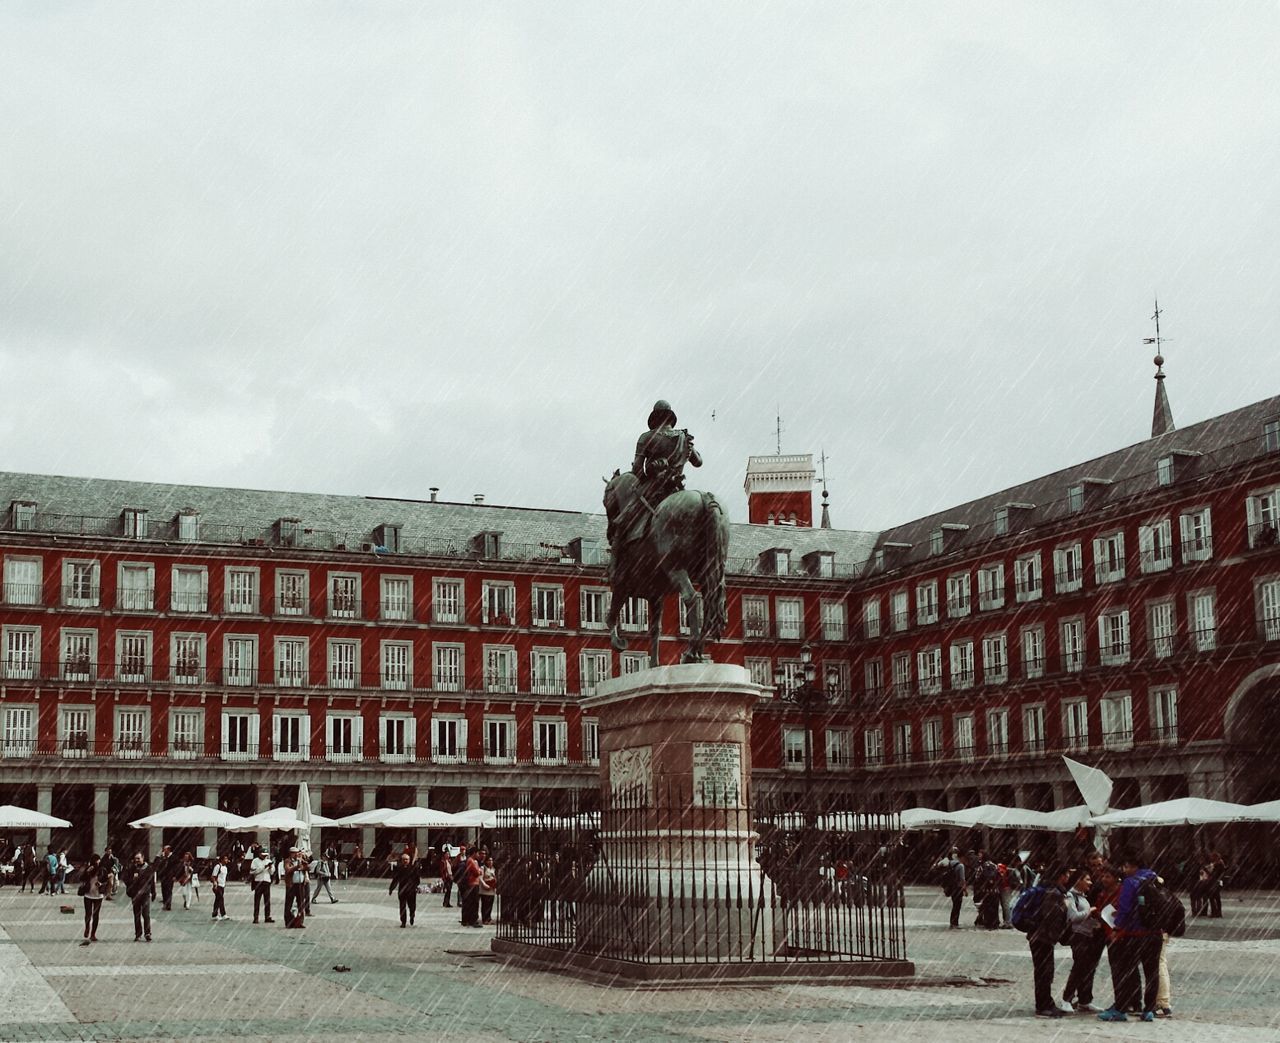 Statue at town square against cloudy sky